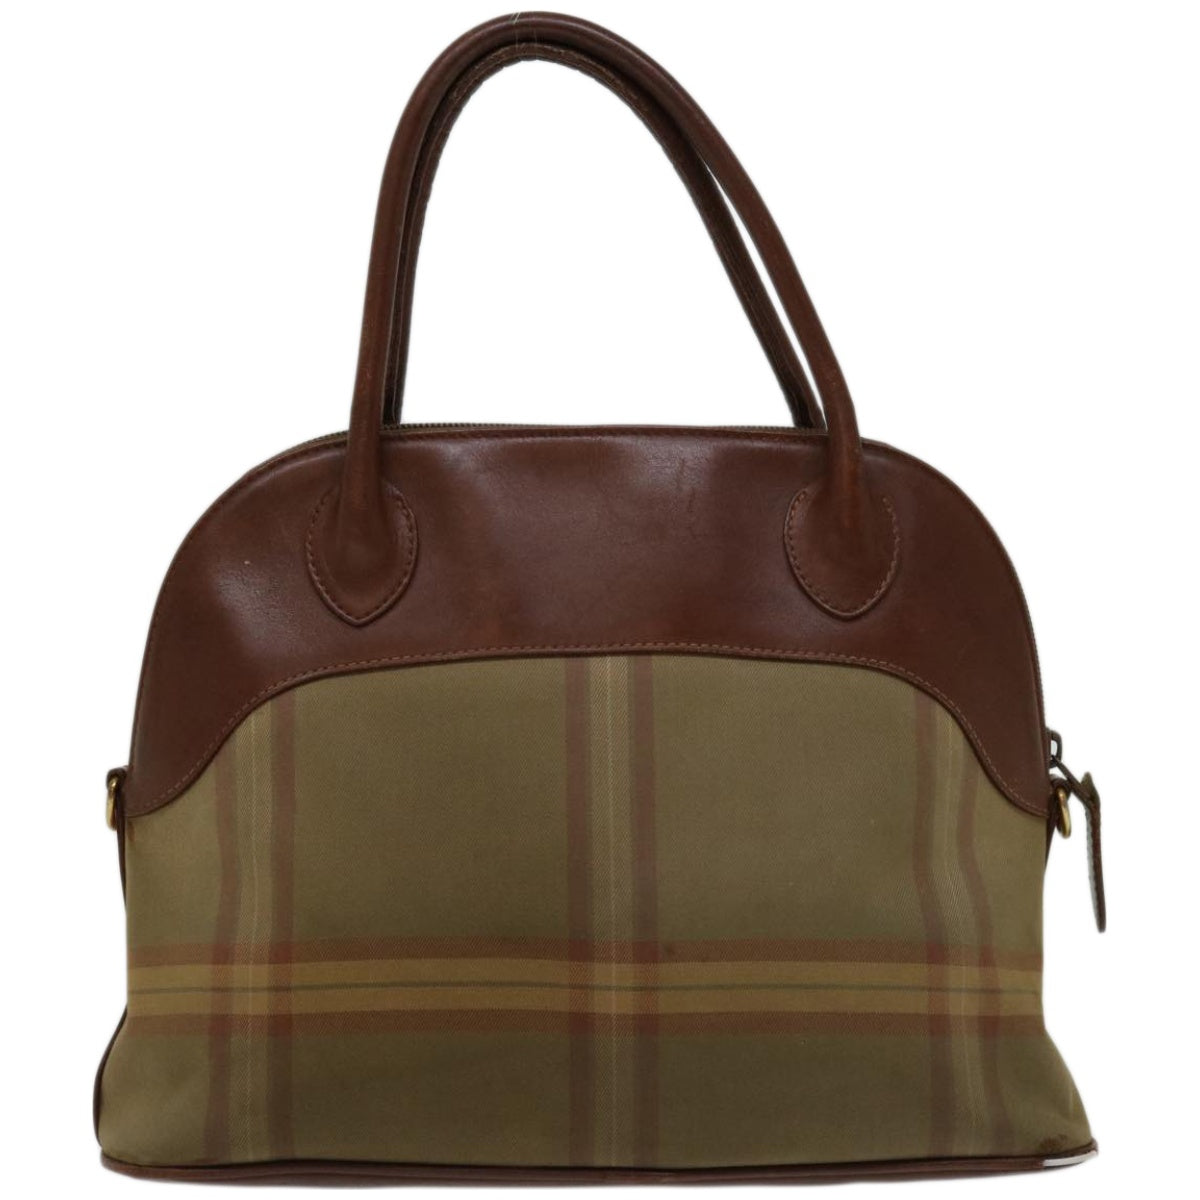 Burberrys Hand Bag Canvas Brown Auth bs12031 - 0